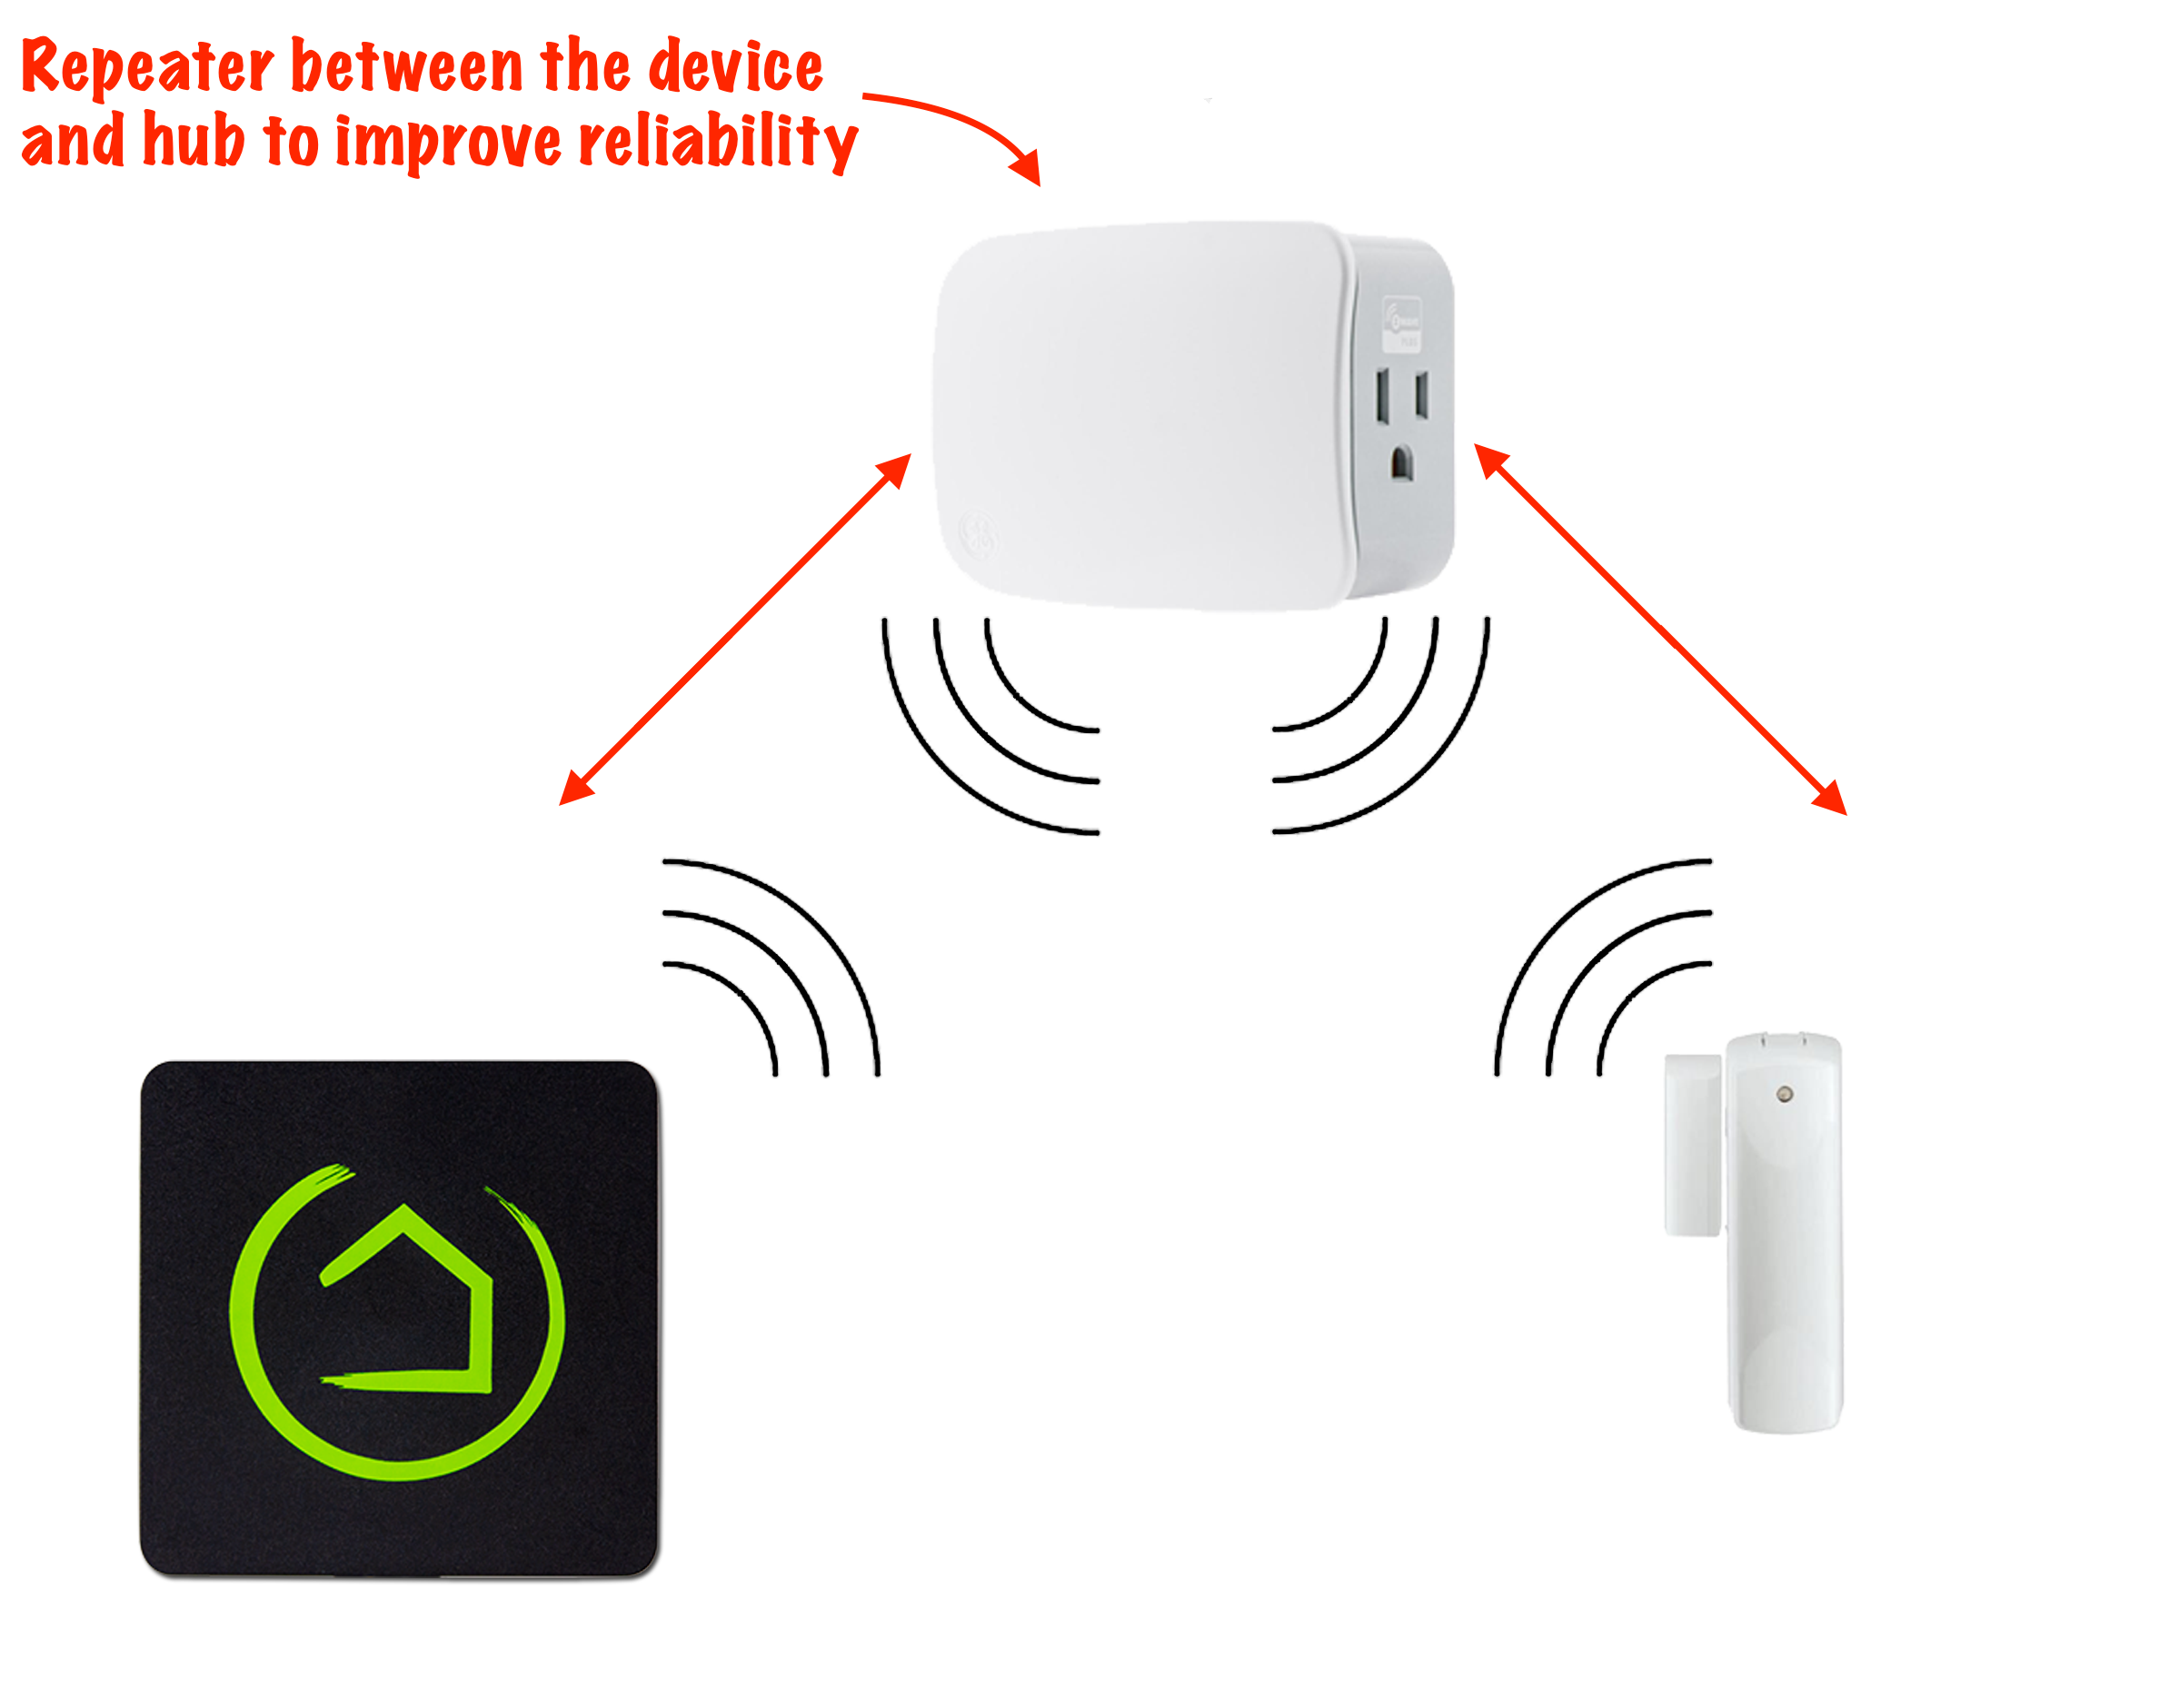 Placing a repeater betwween the hub and your device(s) can improve reliability